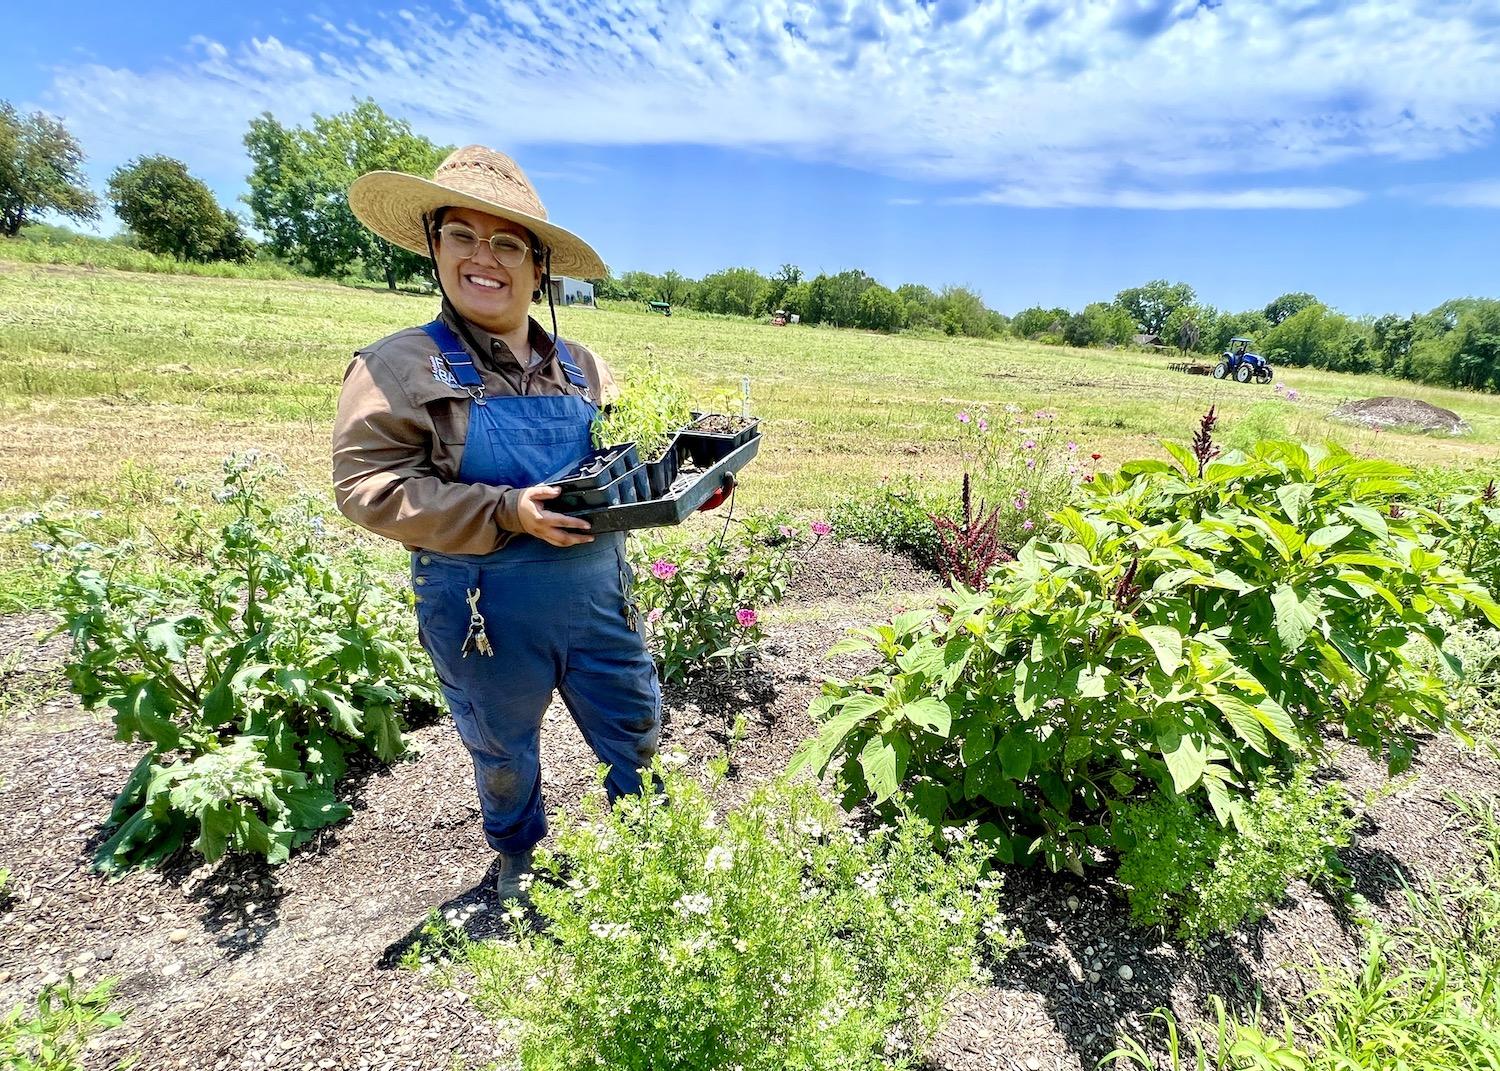 Liliana Reyes, a farm and garden worker with the San Antonio Food Bank, stands in the demonstration field at Mission San Juan.